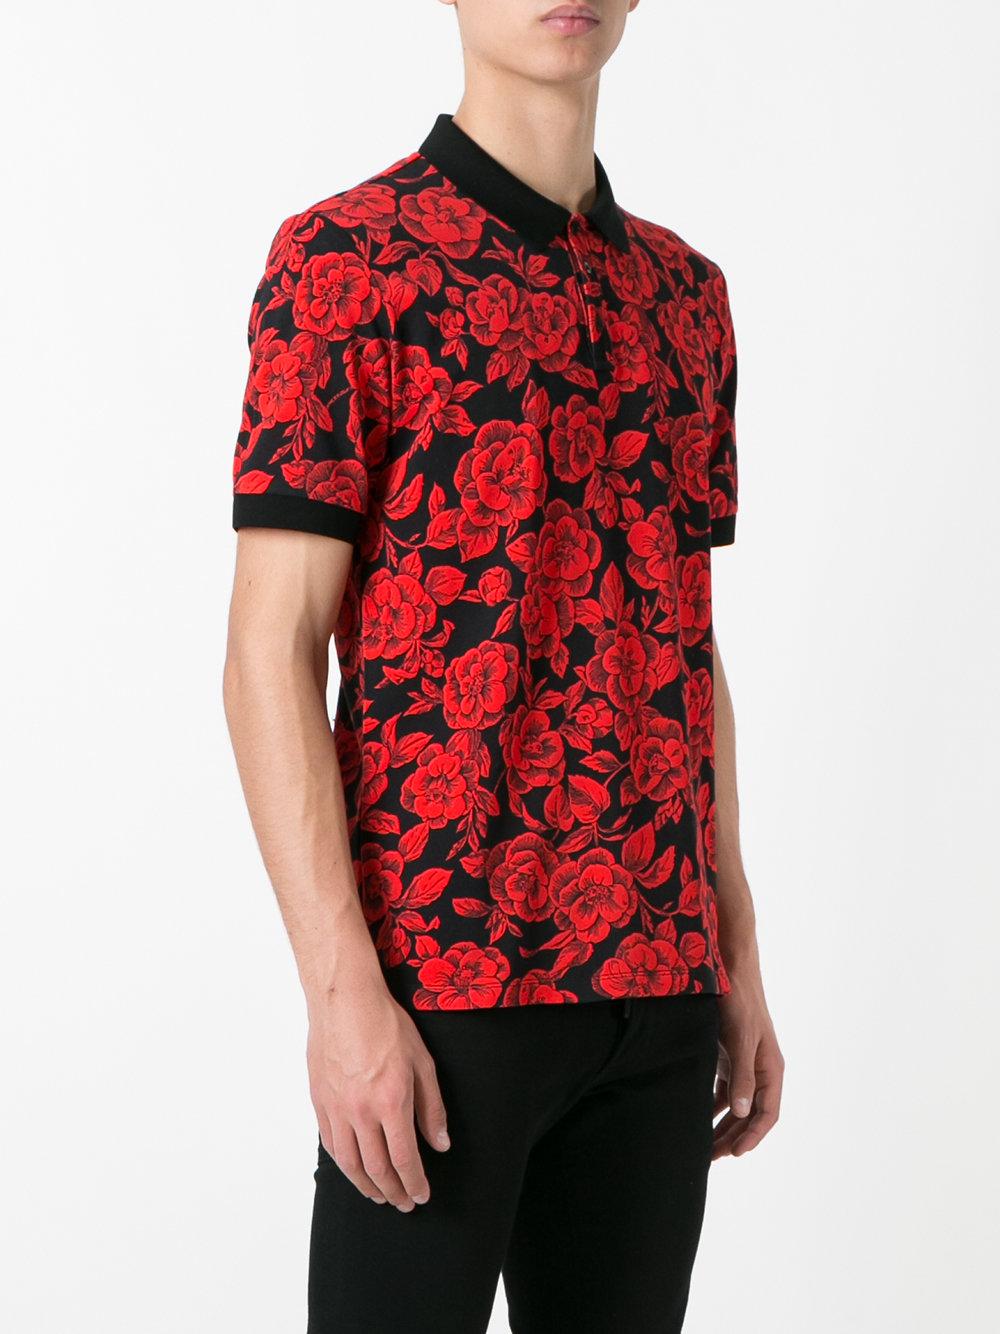 MSGM Rose Print Polo Shirt in Red for Men - Lyst